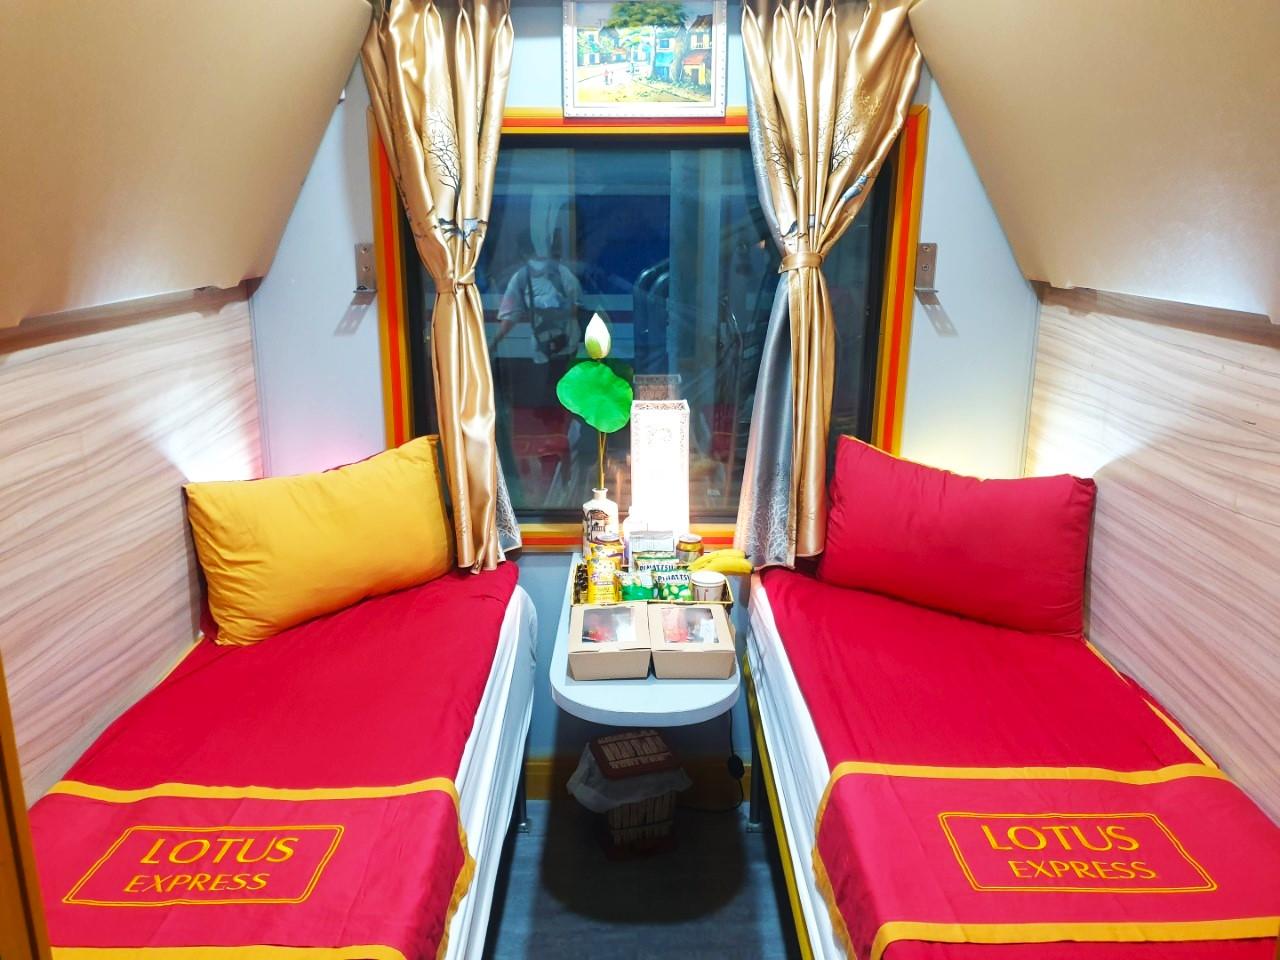 Ninh Binh - Dong Hoi in VIP 2 berth-cabin on SE19 (22h02 – 06h25) - Price per person not per cabin (VIP 2 Sleepers, One Way)